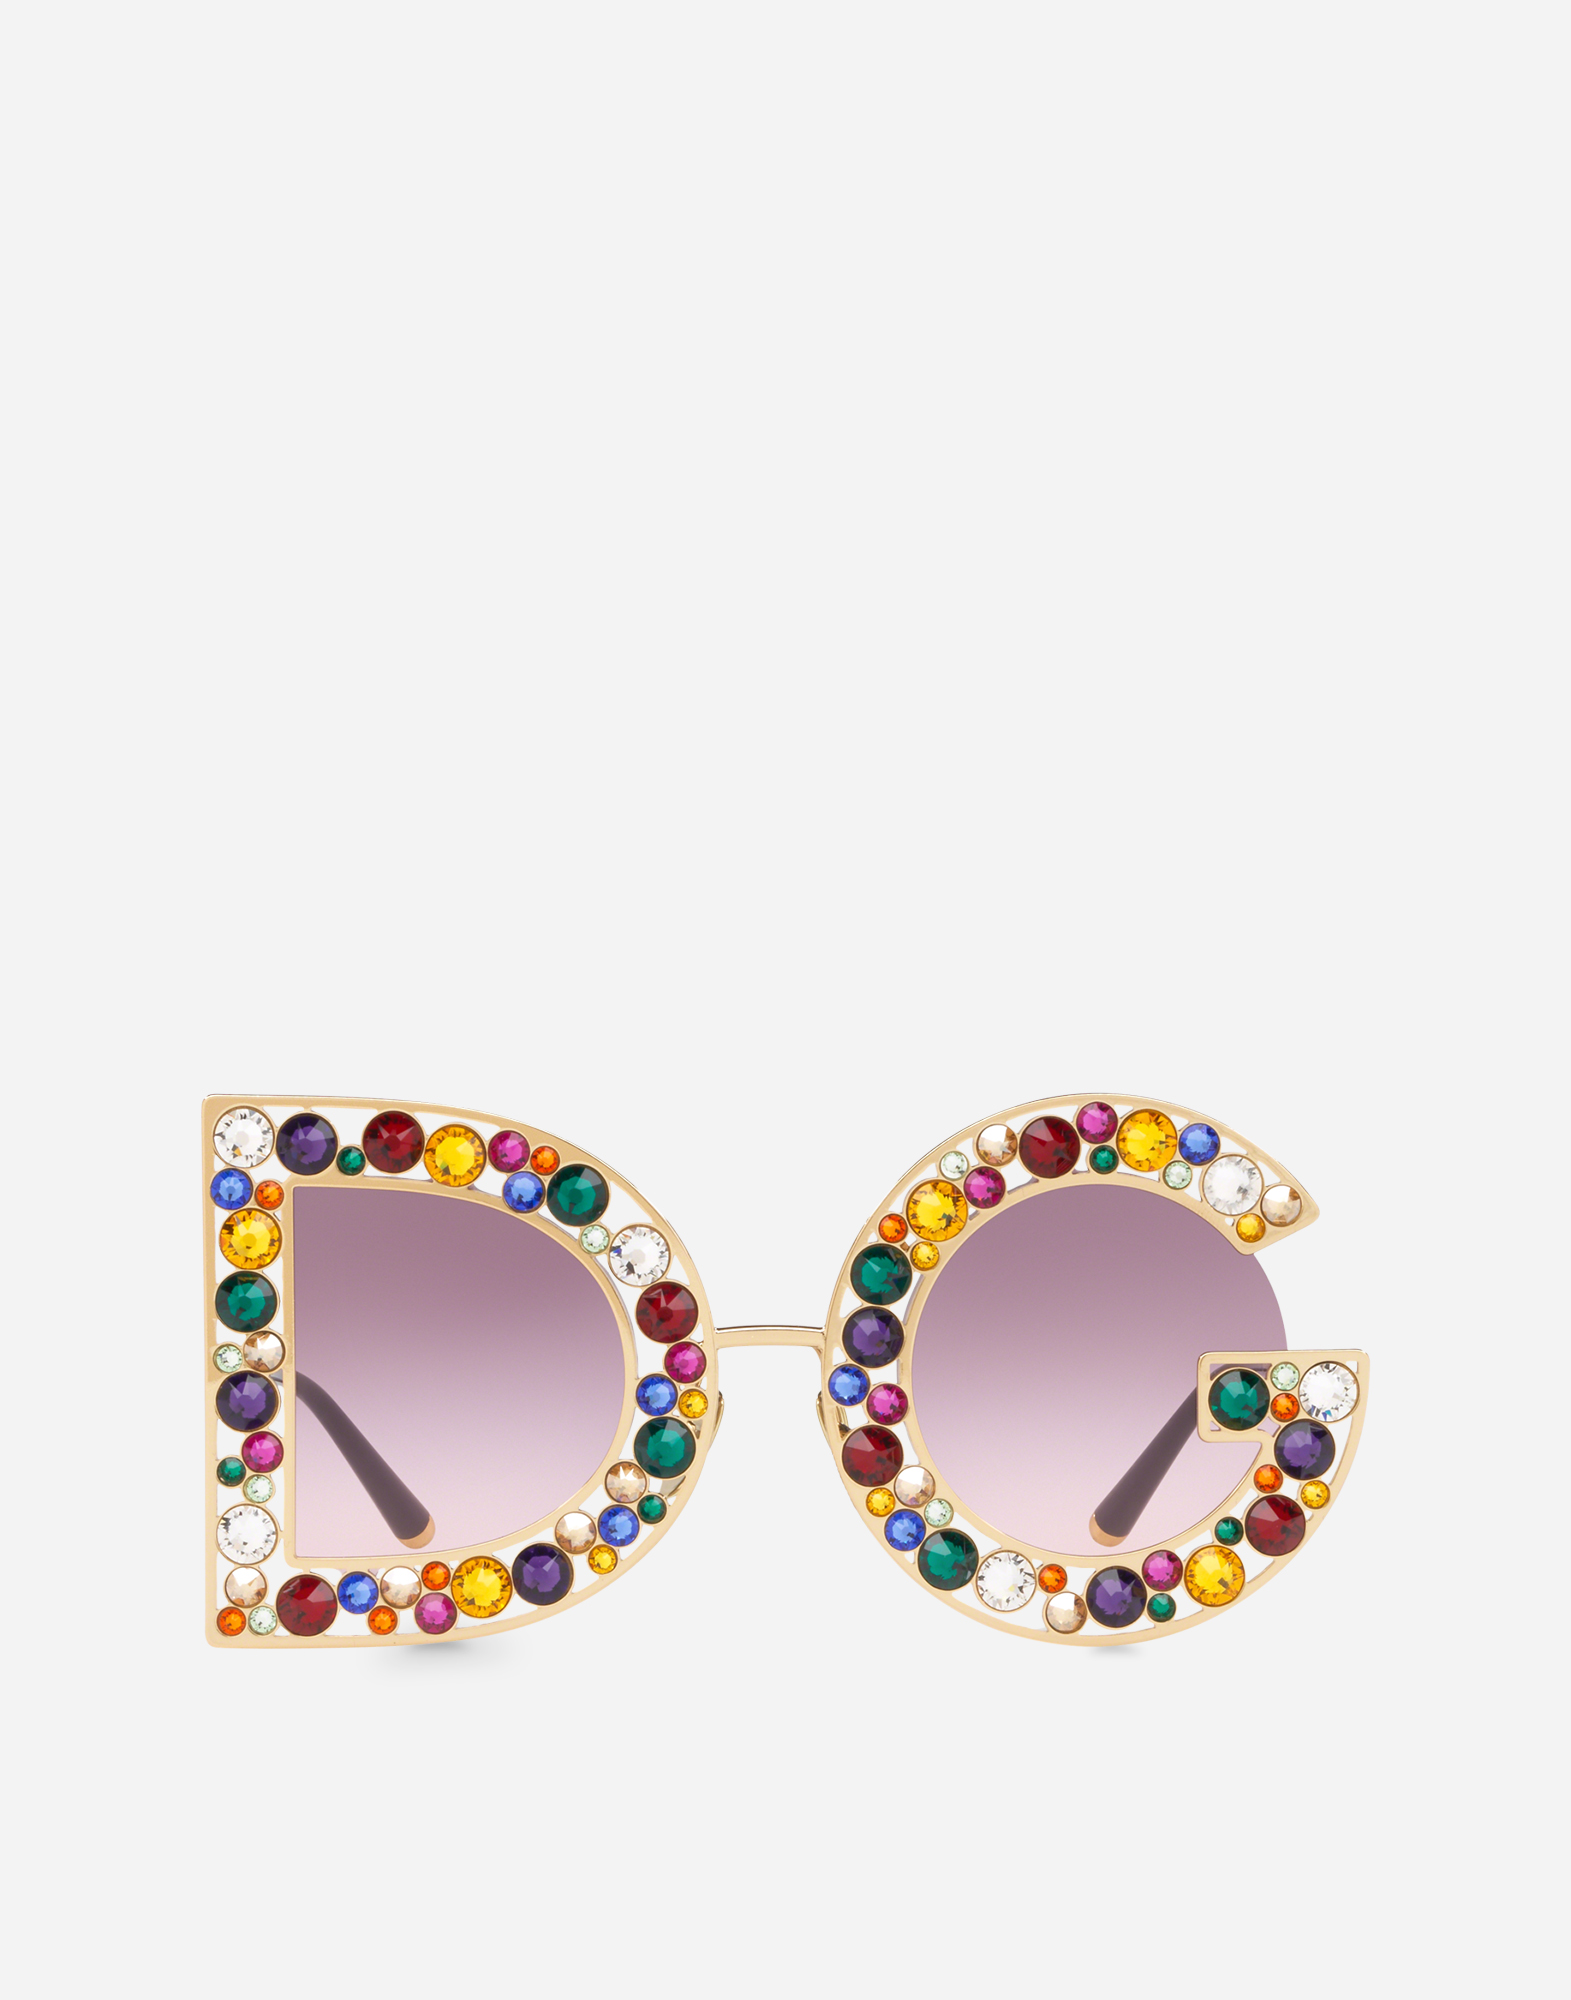 DG Crystal sunglasses in Shiny Gold and Leo Multicolor Crystals